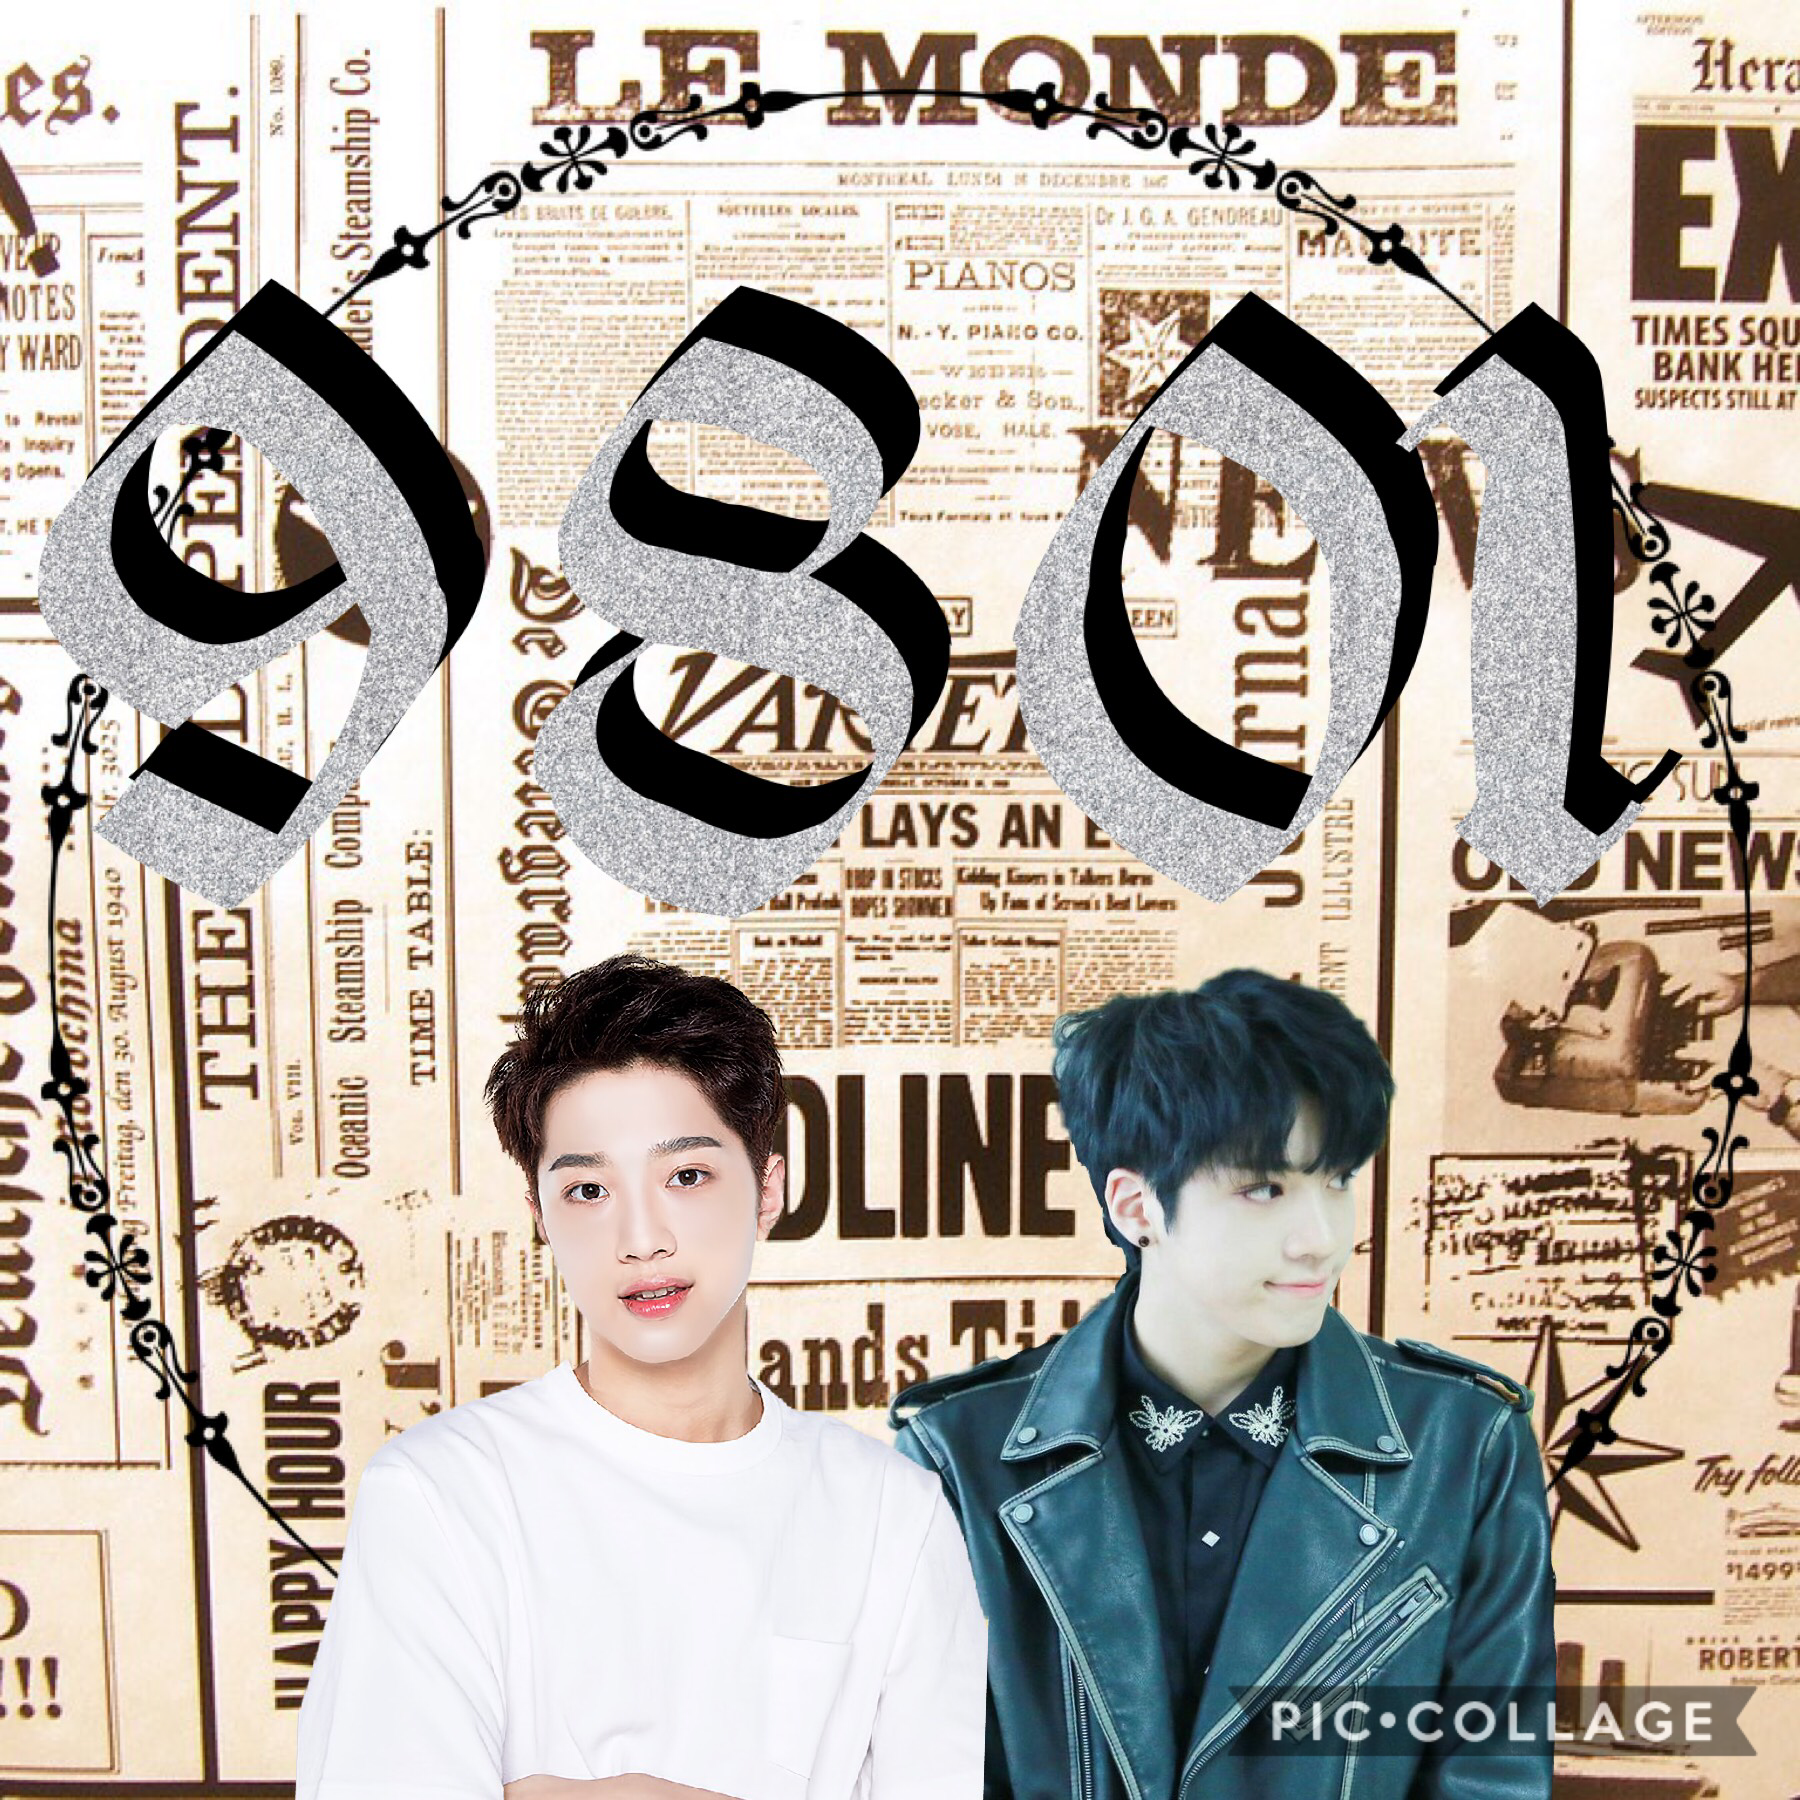 So recently Cube announced that Wooseok and Guanlin were gonna release a mini album called 9801. I don’t think it’s out yet, but when it is I just wanted you all to support them! 